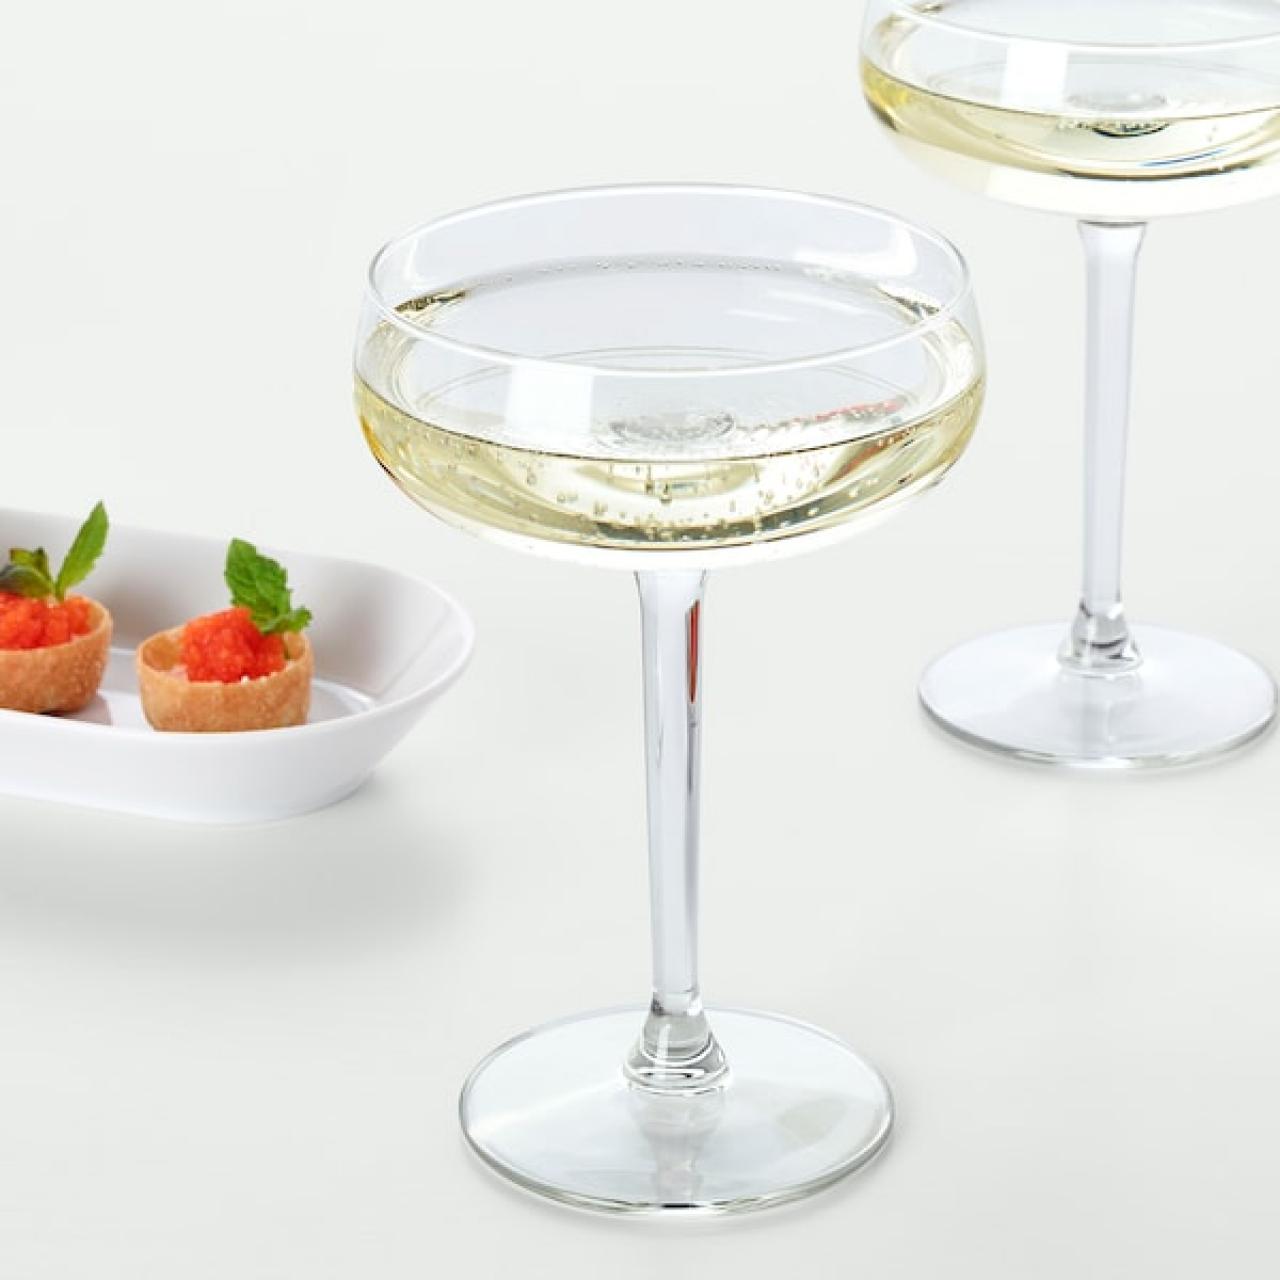 https://food.fnr.sndimg.com/content/dam/images/food/products/2022/5/6/rx_storhet-champagne-coupe.jpeg.rend.hgtvcom.1280.1280.suffix/1651854843906.jpeg